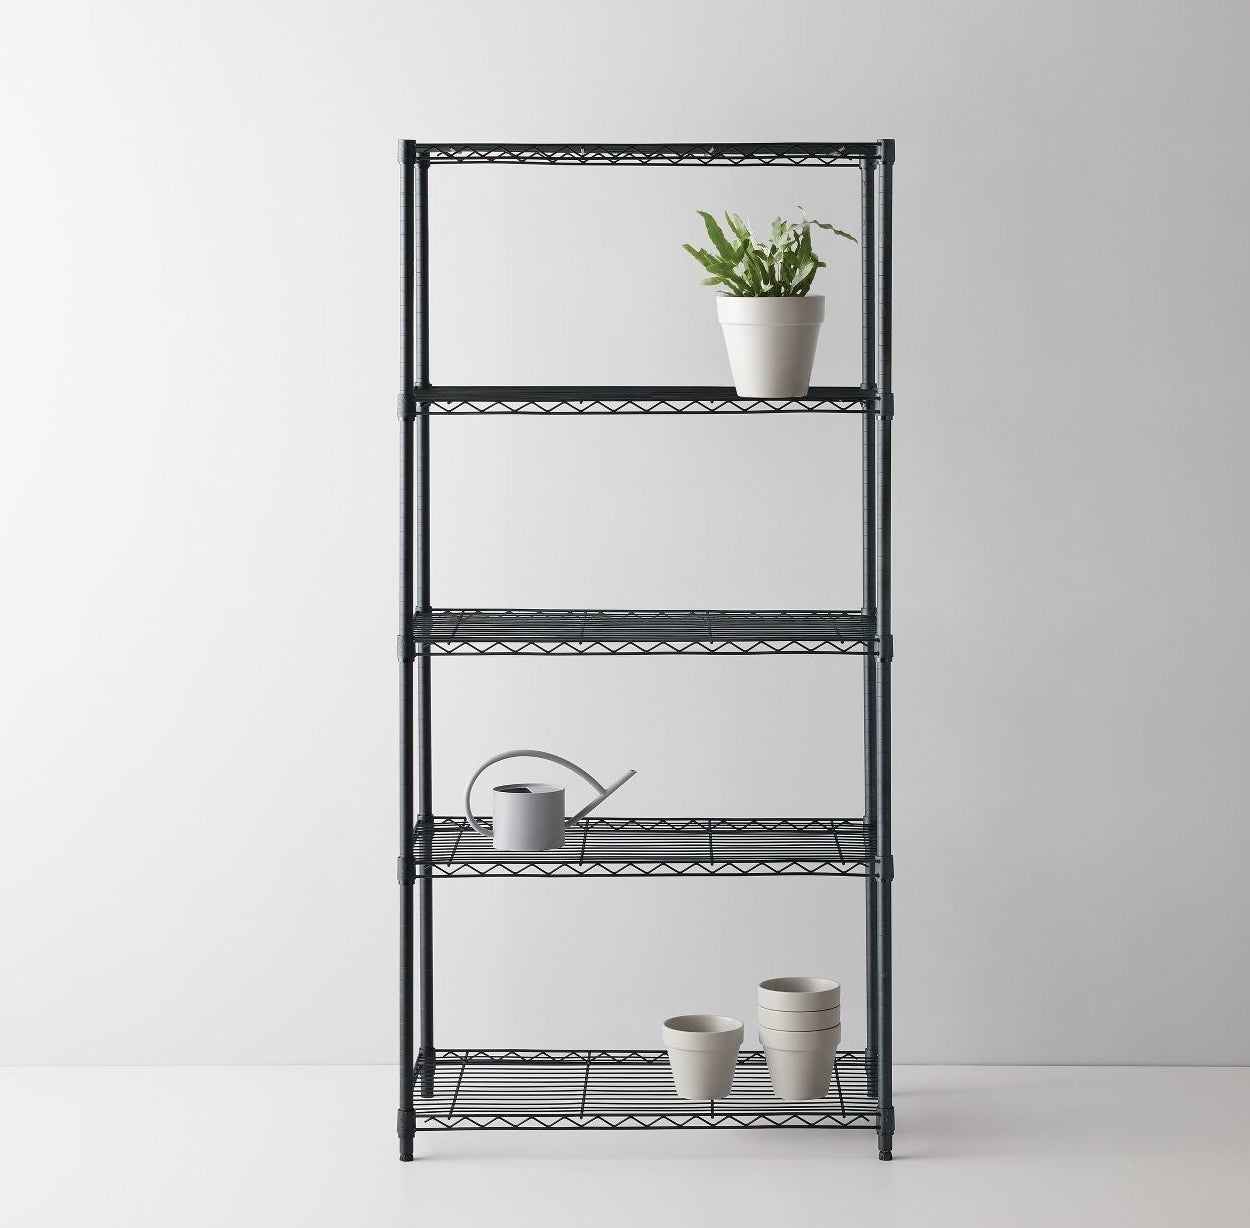 An image of a five-tier wide wire shelf